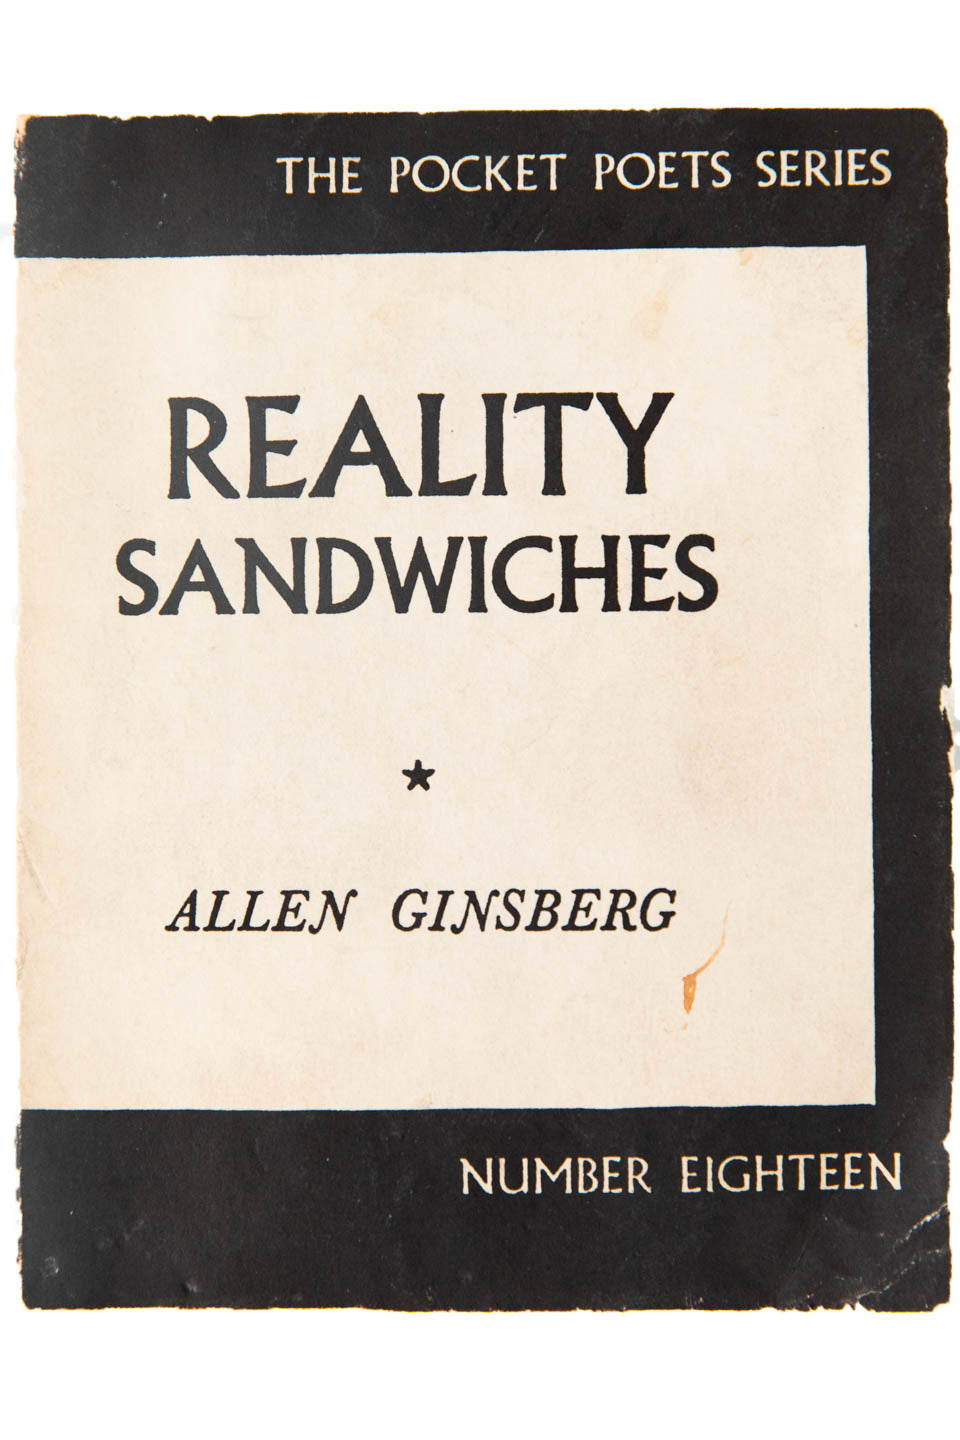 REALITY SANDWICHES